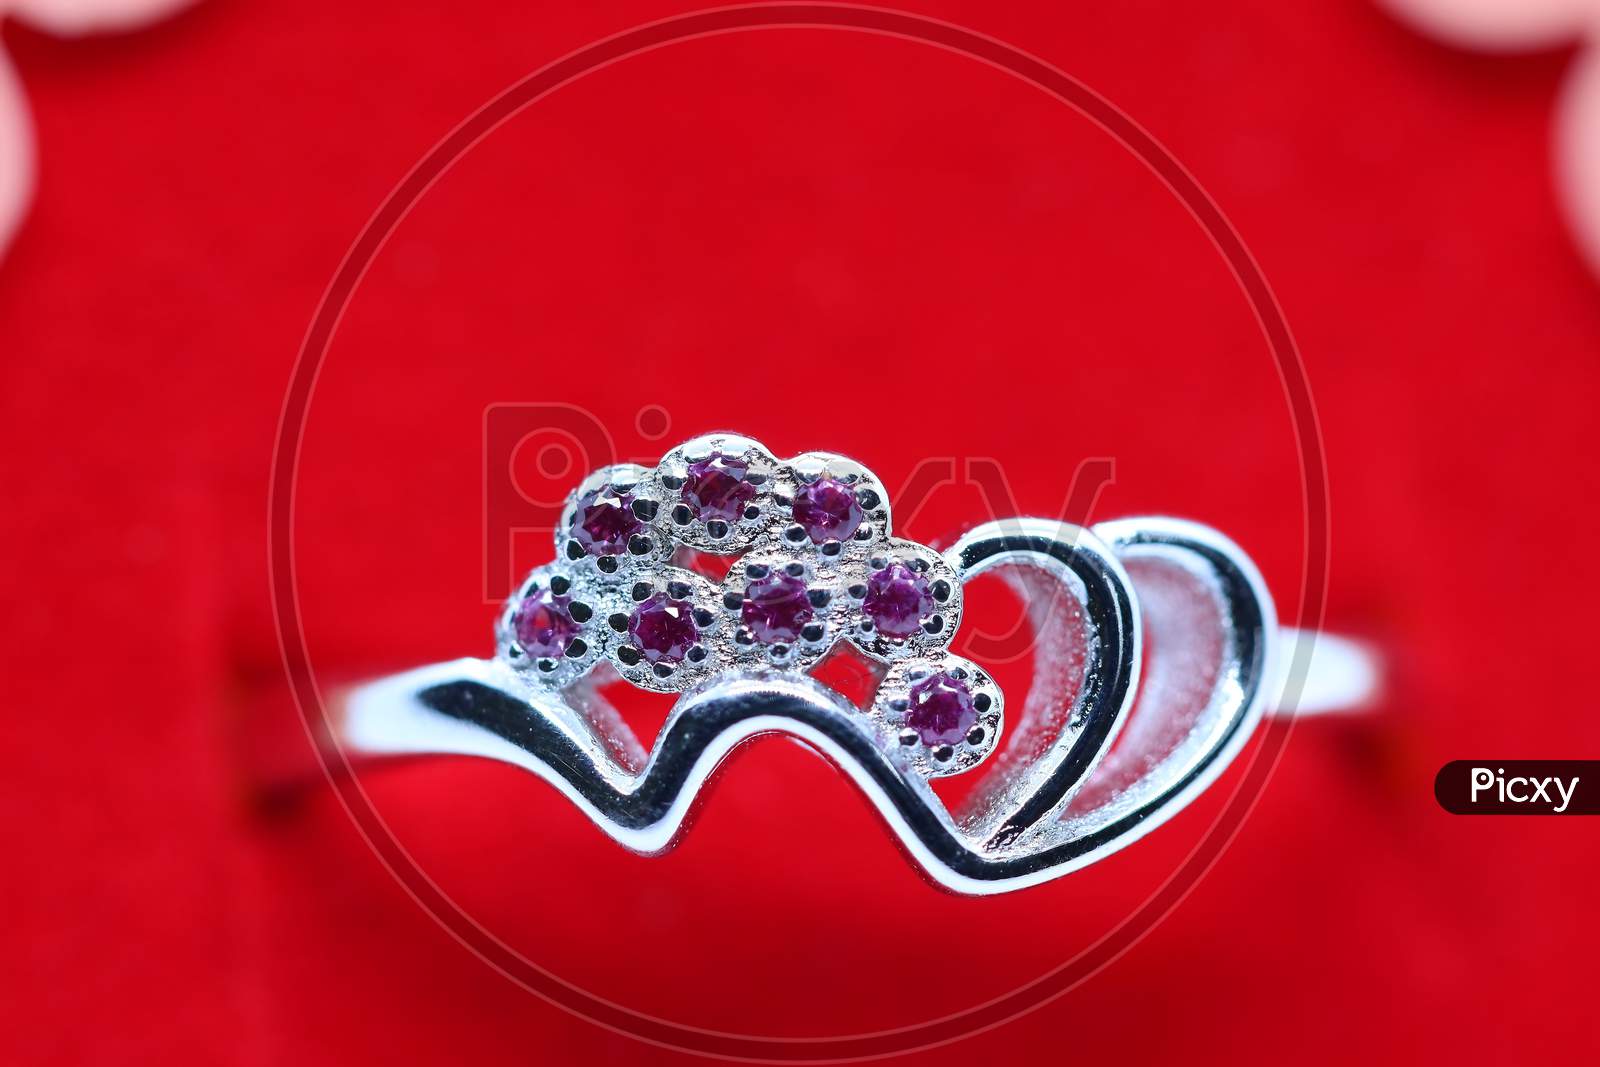 Silver Ring With Pink Stone